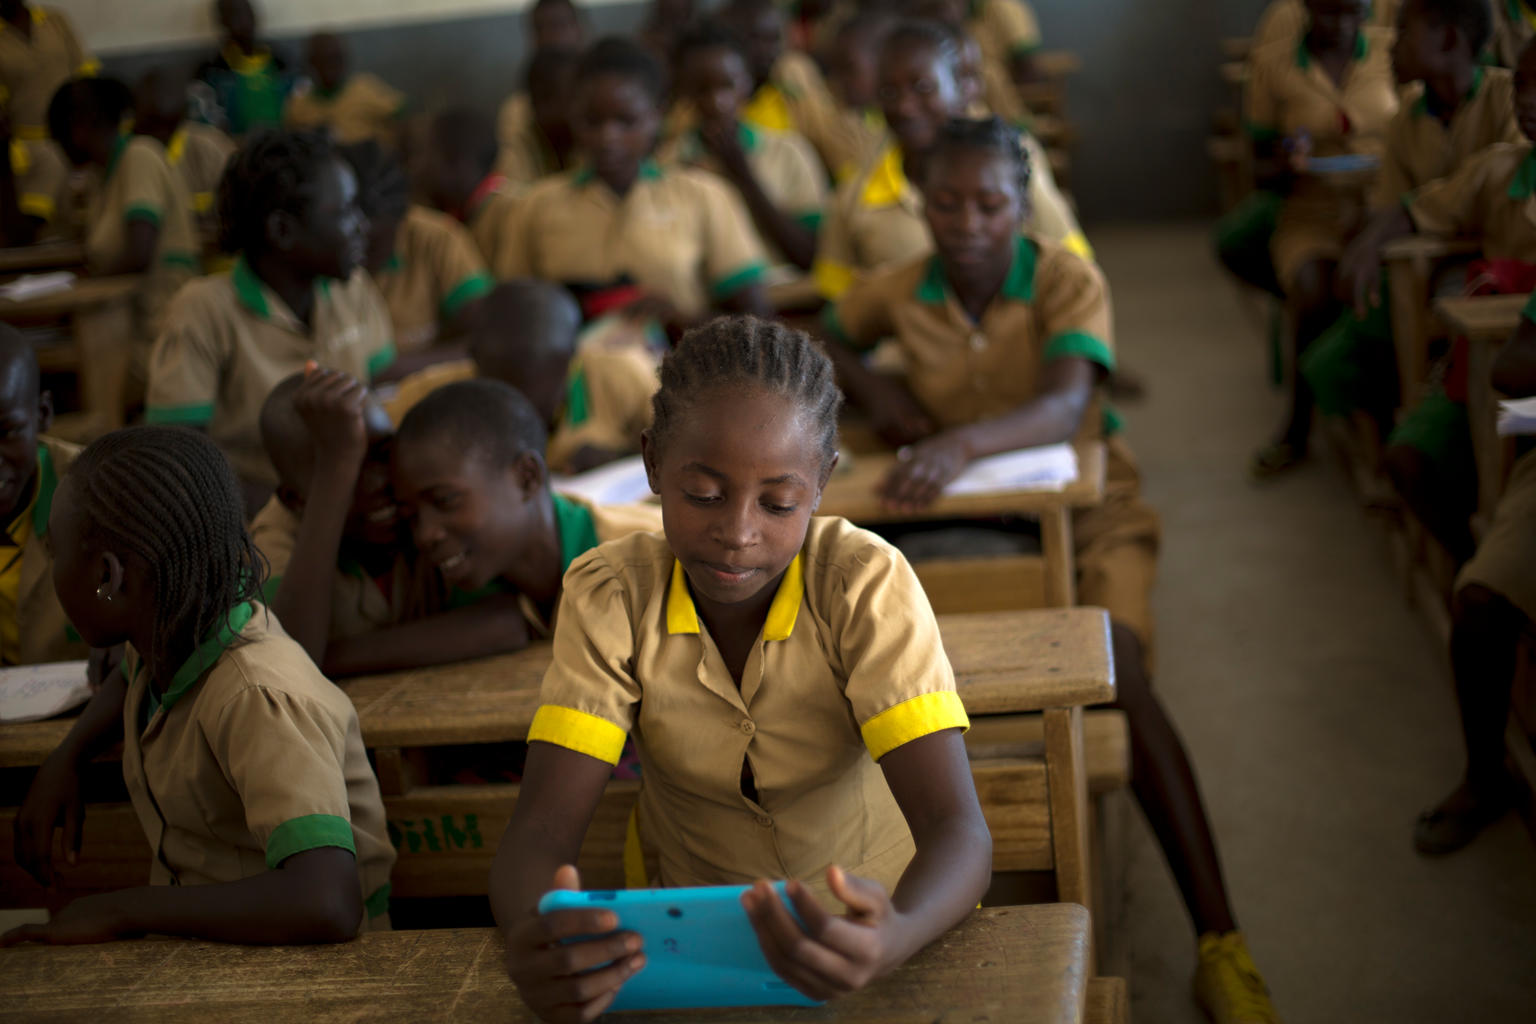 Children in West Africa look at a tablet at school.